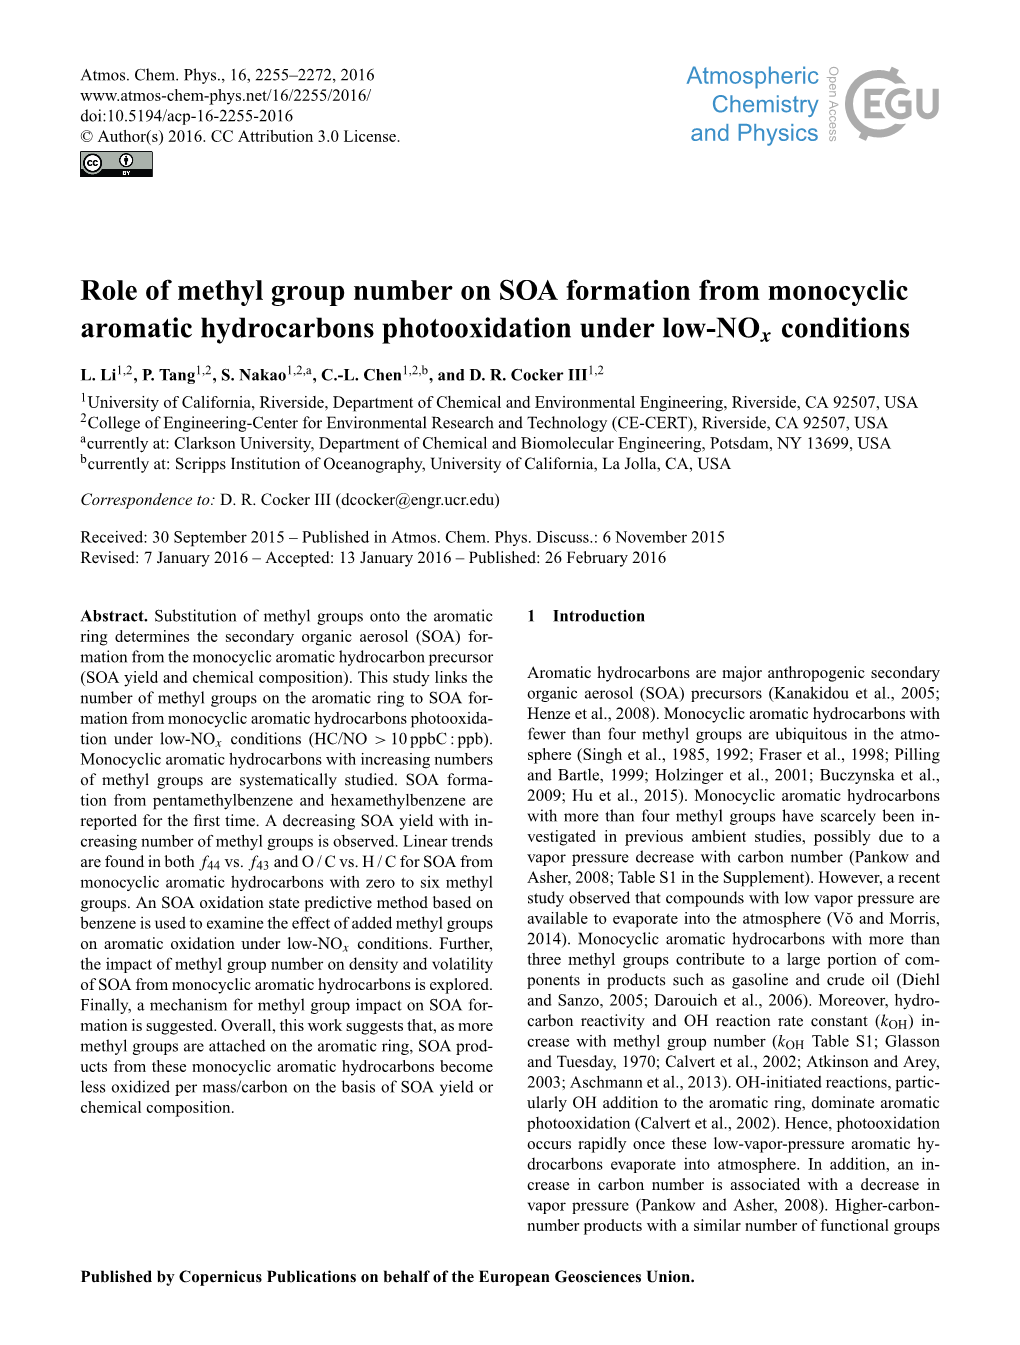 Role of Methyl Group Number on SOA Formation from Monocyclic Aromatic Hydrocarbons Photooxidation Under Low-Nox Conditions